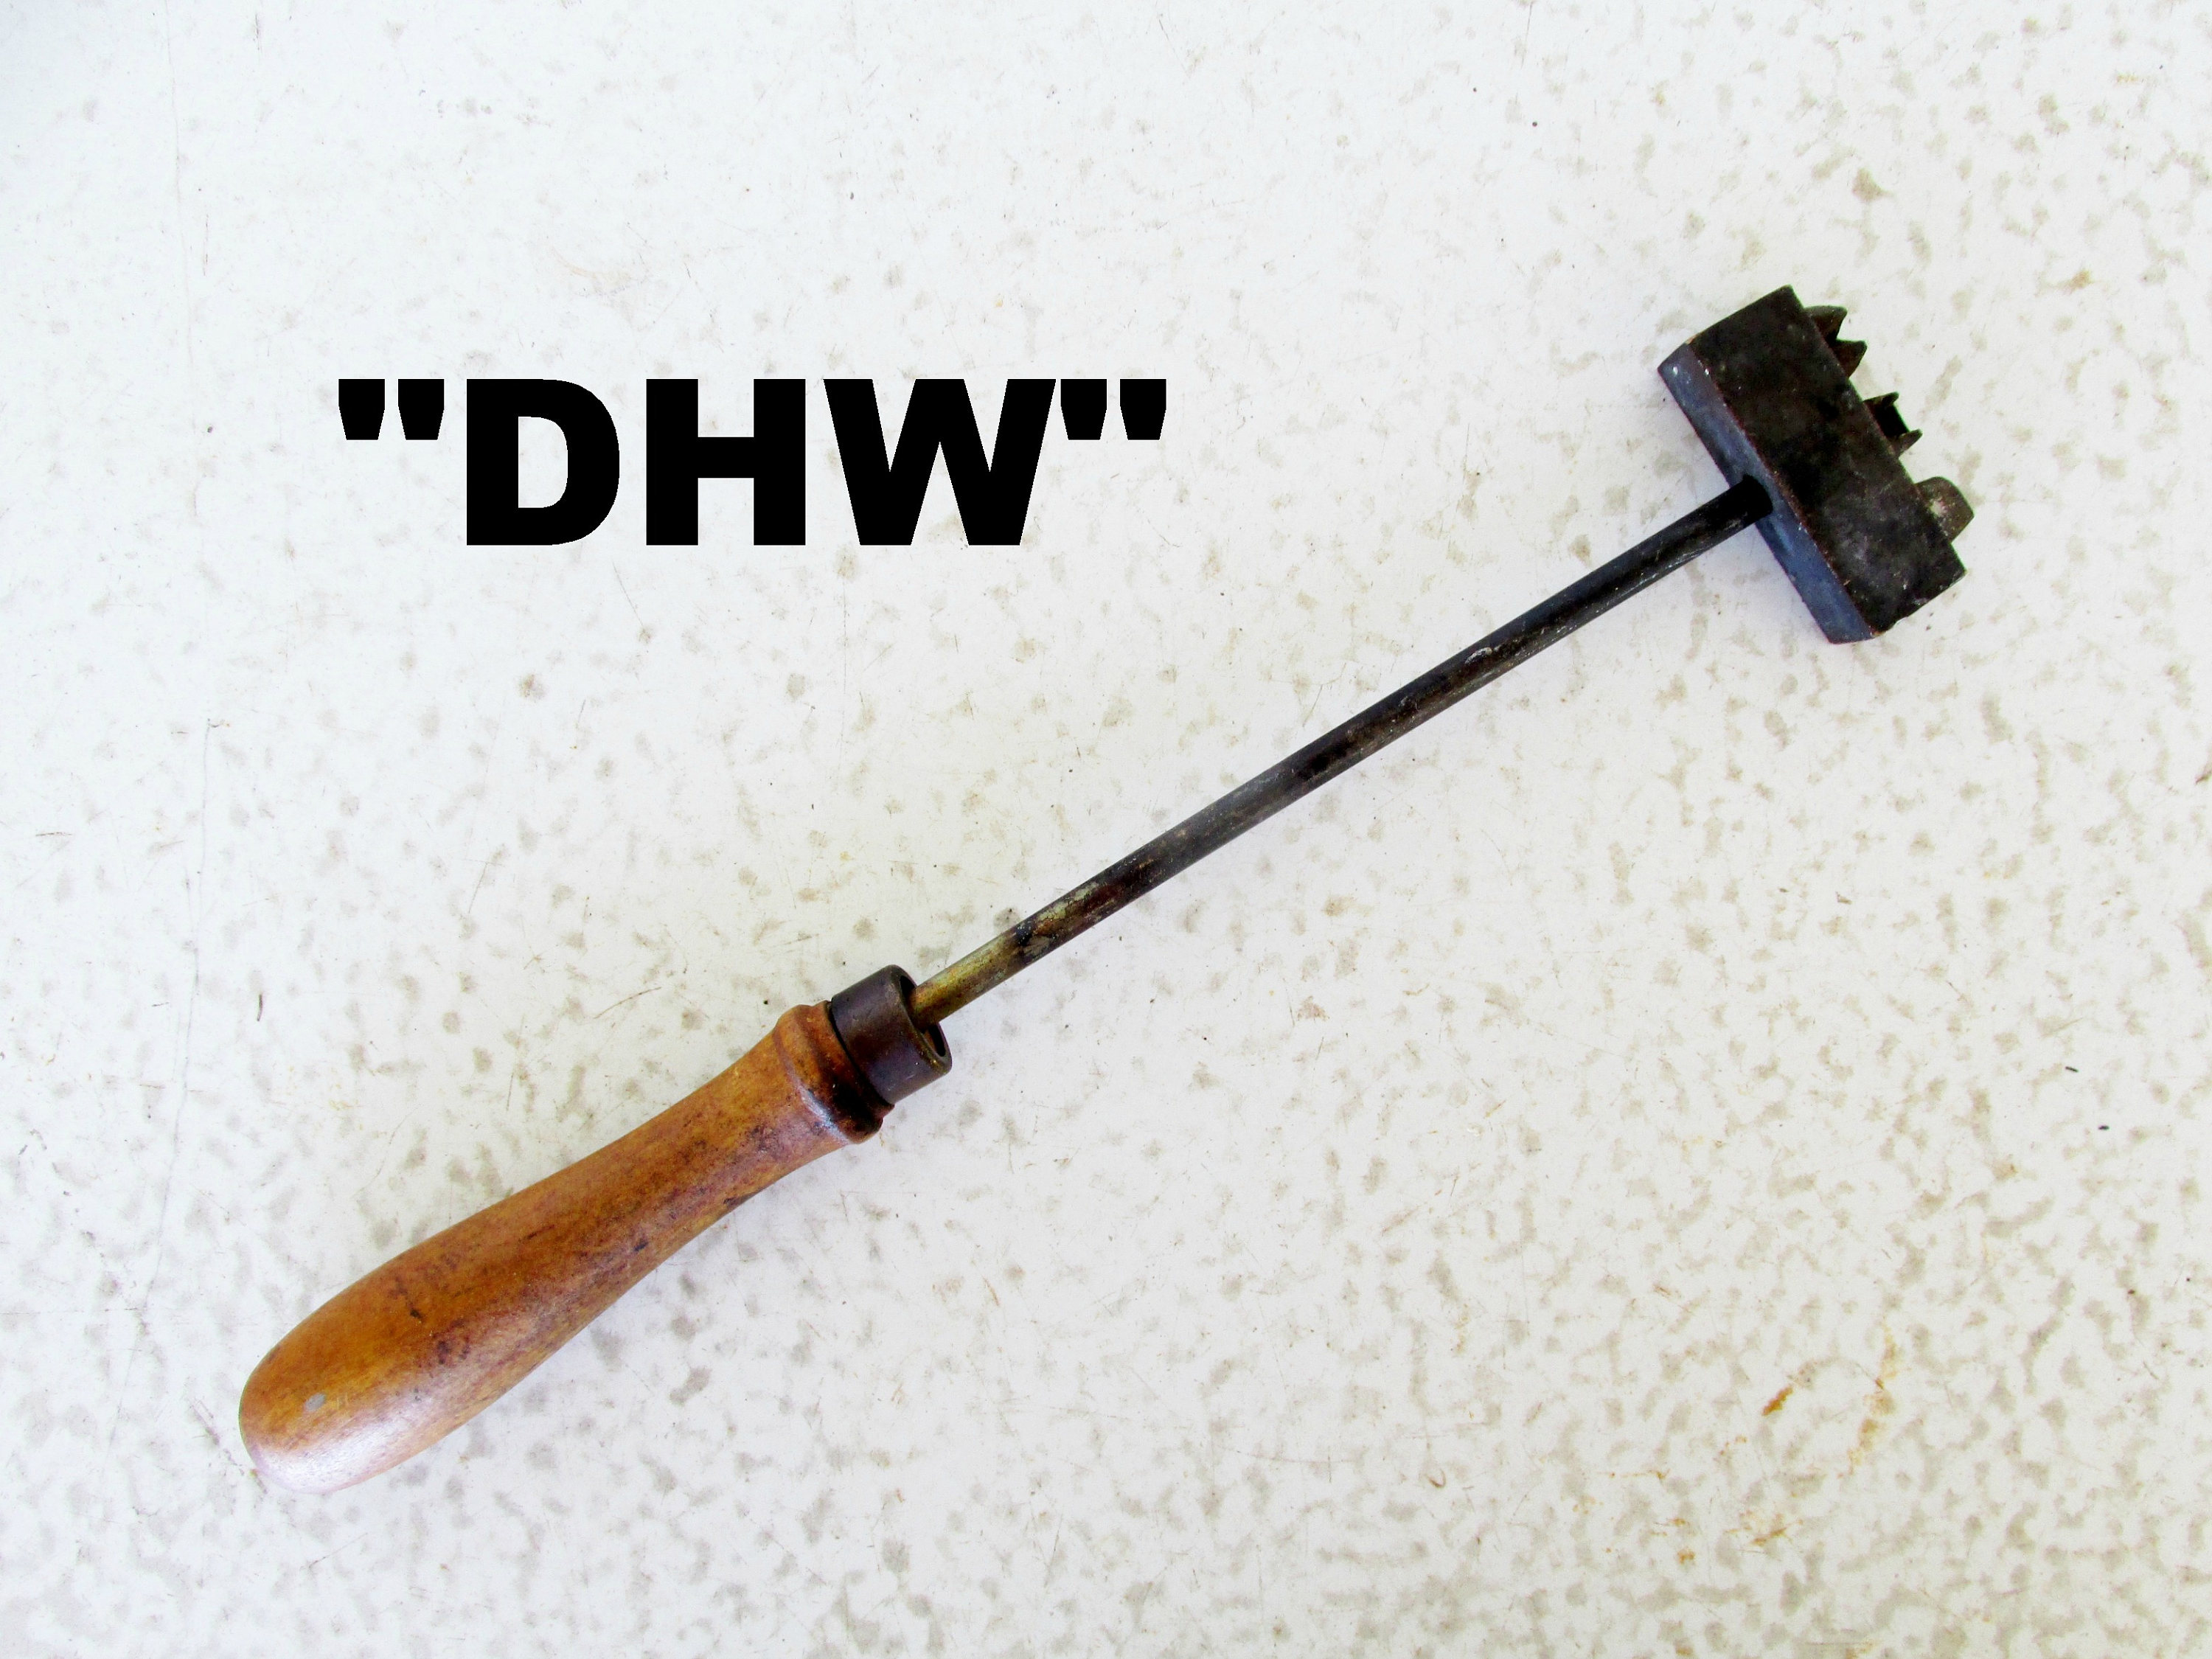 12 Branding Iron with Letters DHW wood handle D H W 